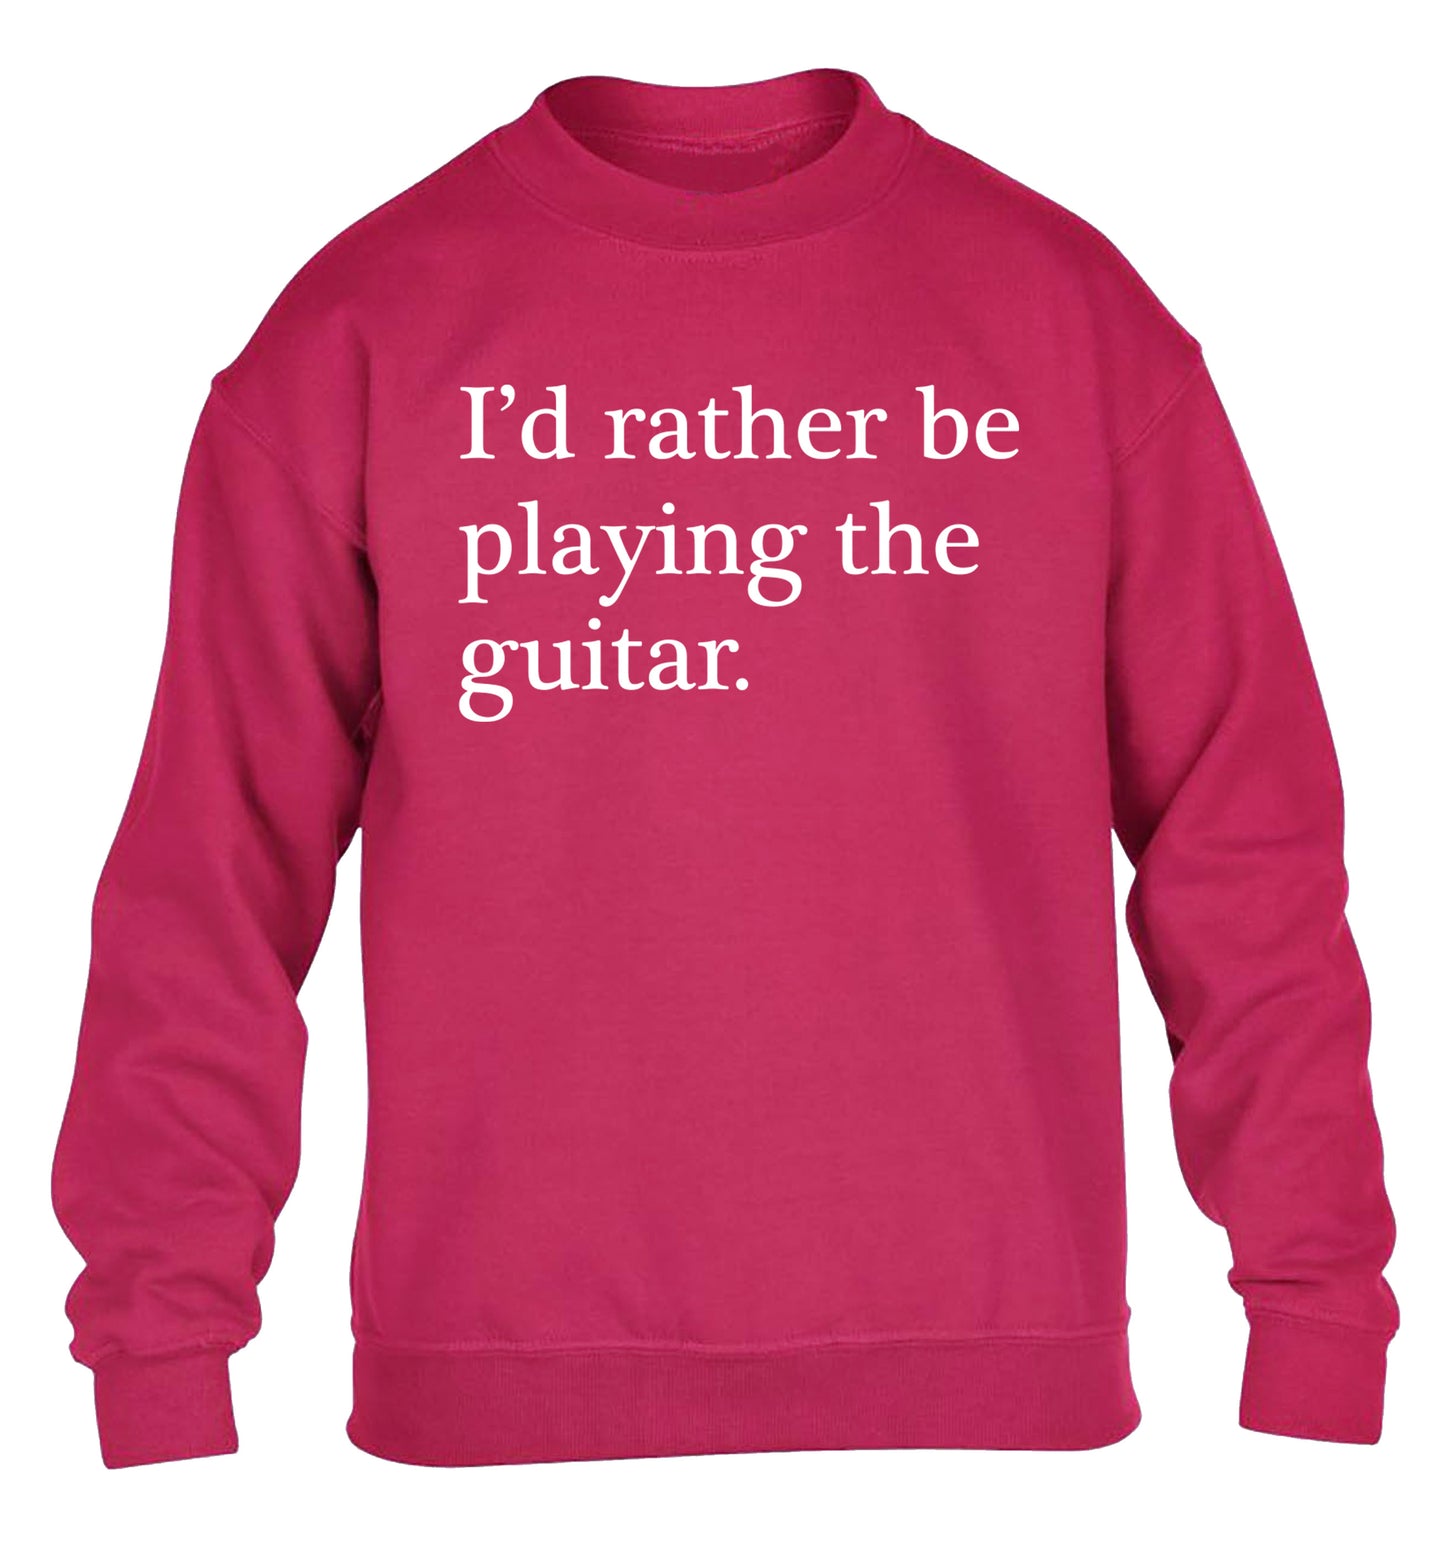 I'd rather be playing the guitar children's pink sweater 12-14 Years